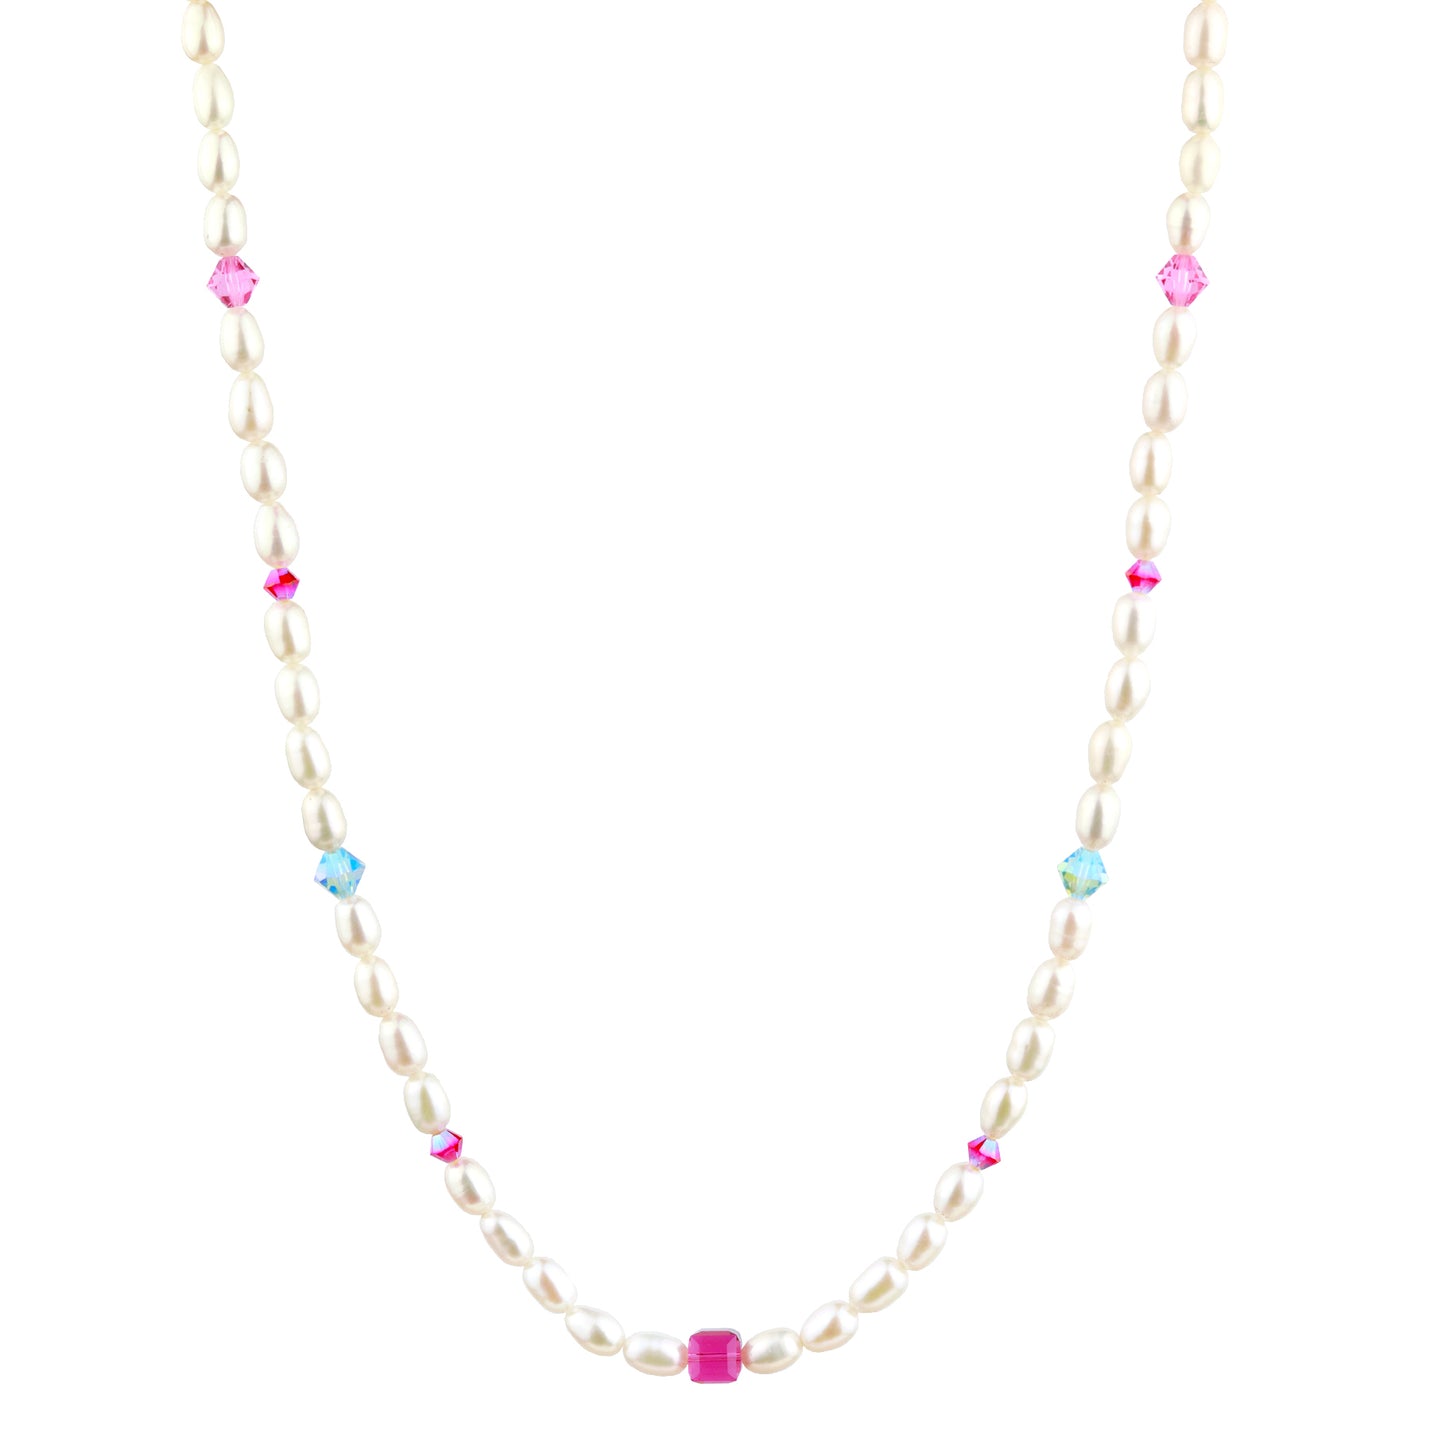 Helena Rice Pearl Necklace in Sky Berry